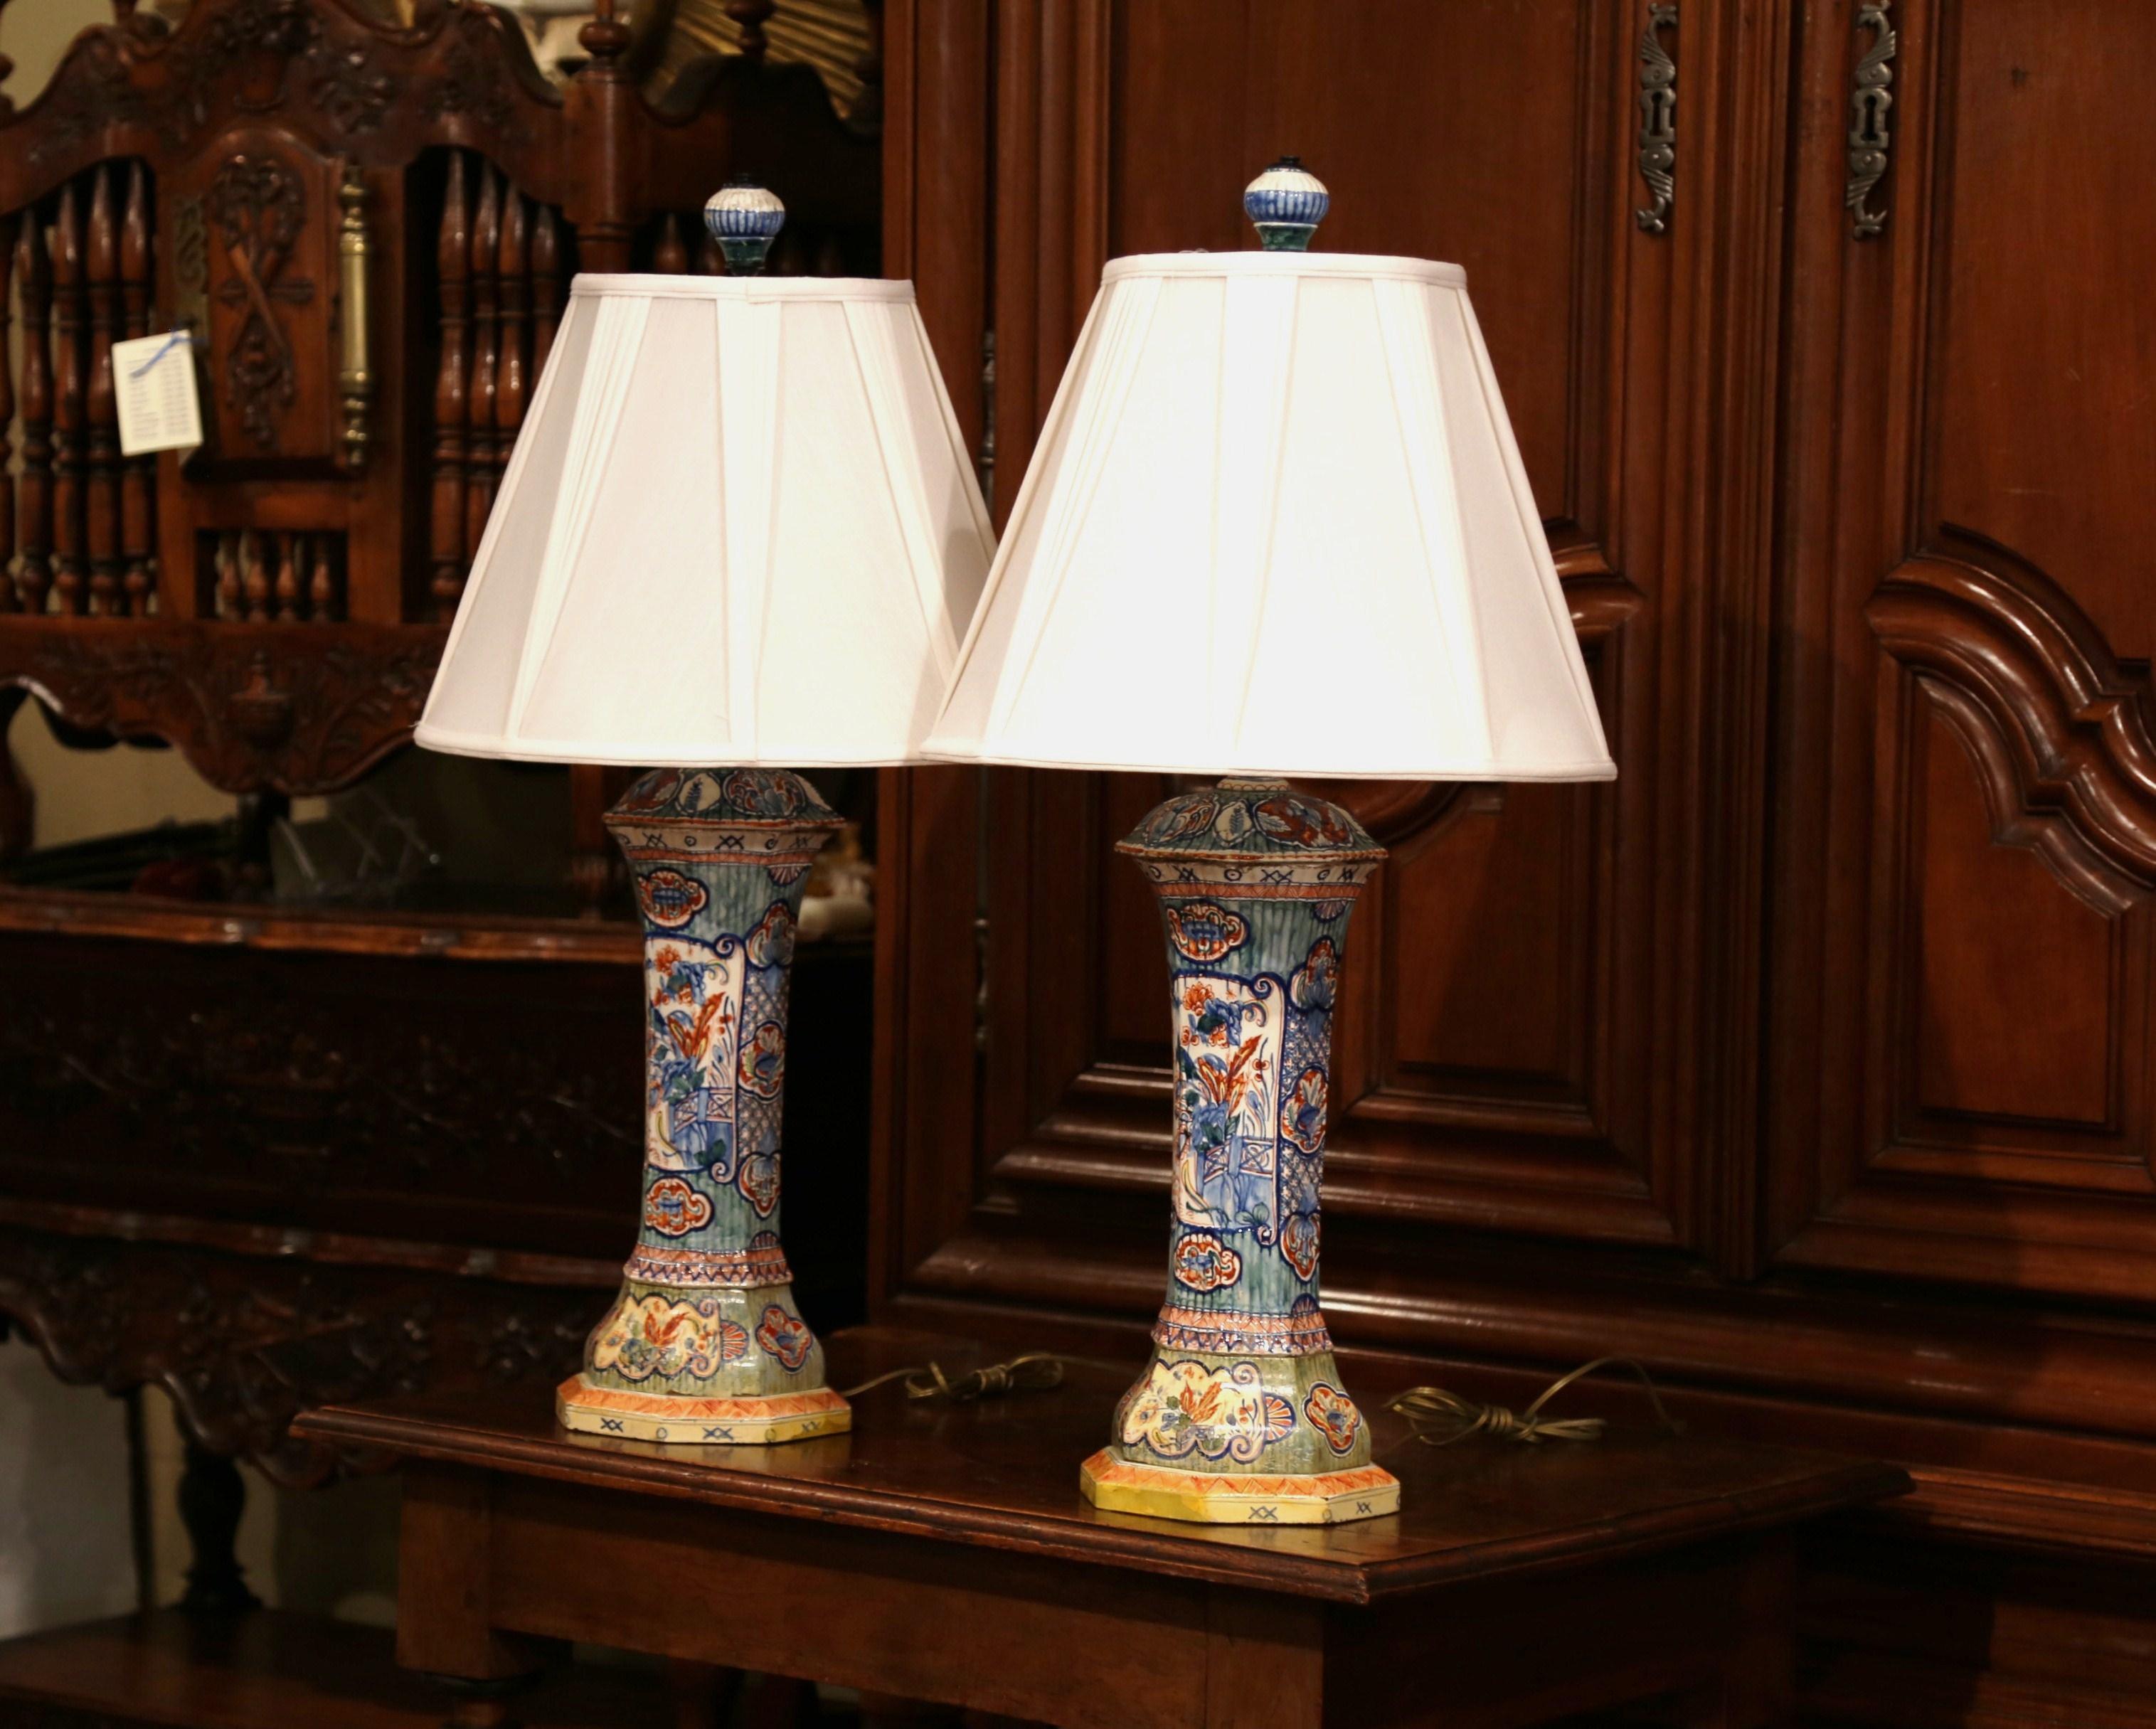 Decorate your bedside tables or living room side tables with these large, colorful antique lamps. Made in France circa 1890, each porcelain base stands on a painted wooden base and is hand painted with Asian-inspired bird and floral decor. Both